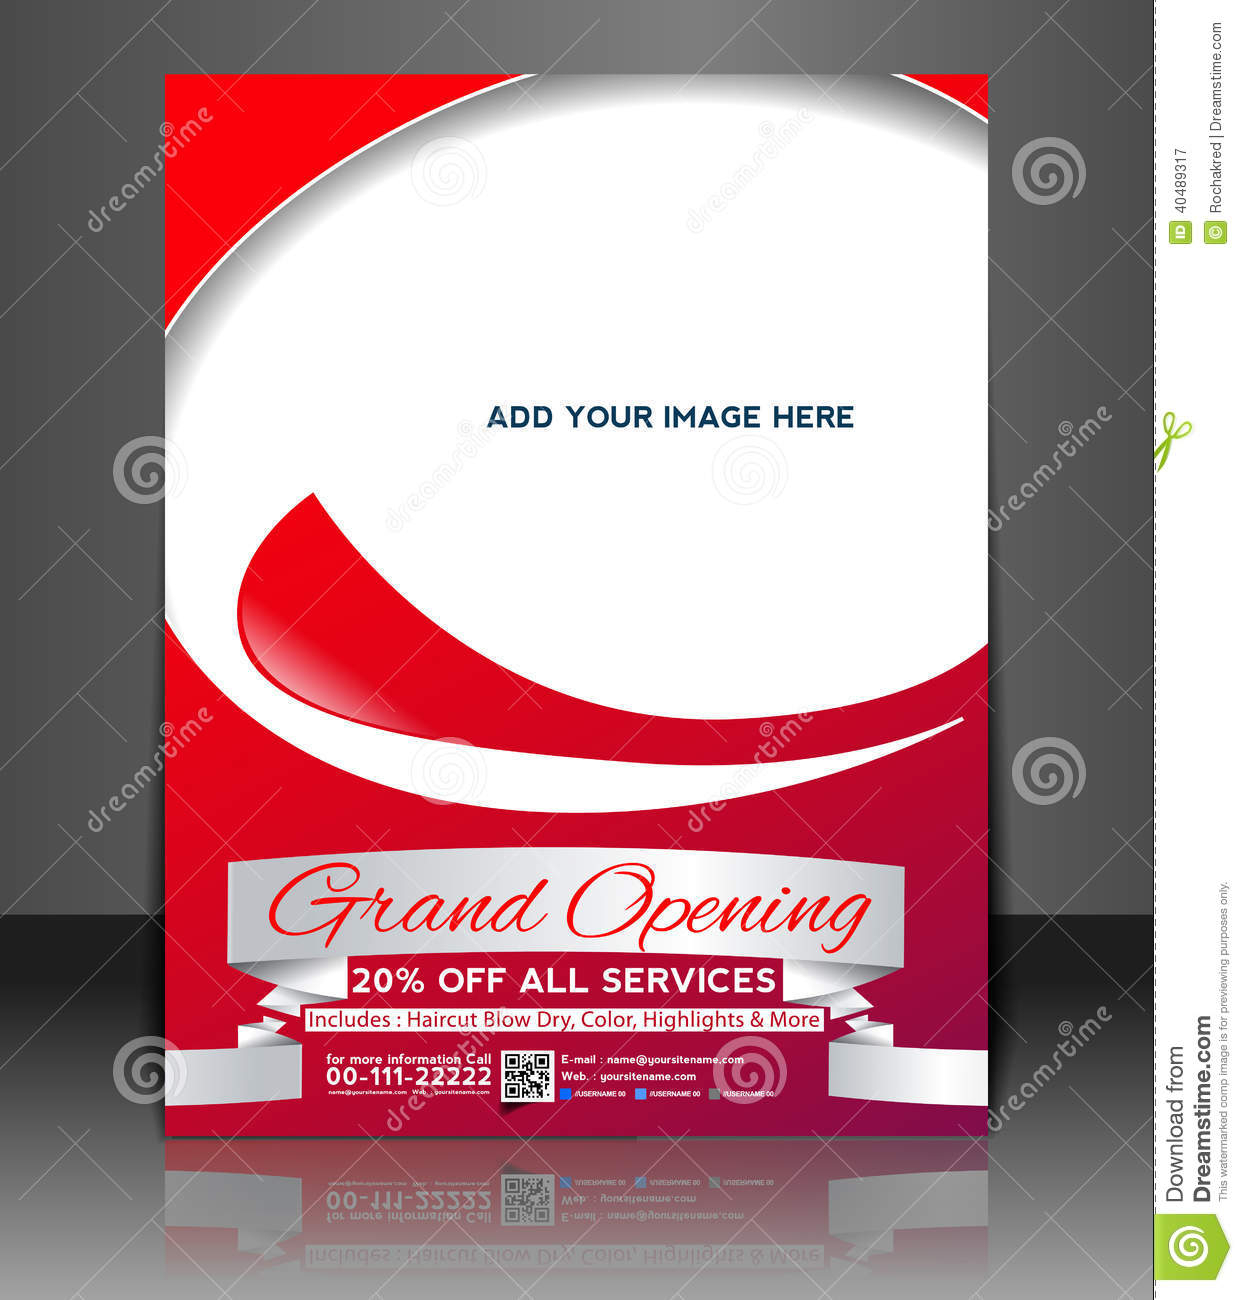 Grand Opening Flyer Design Stock Vector. Illustration Of With Regard To Grand Opening Flyer Template Free